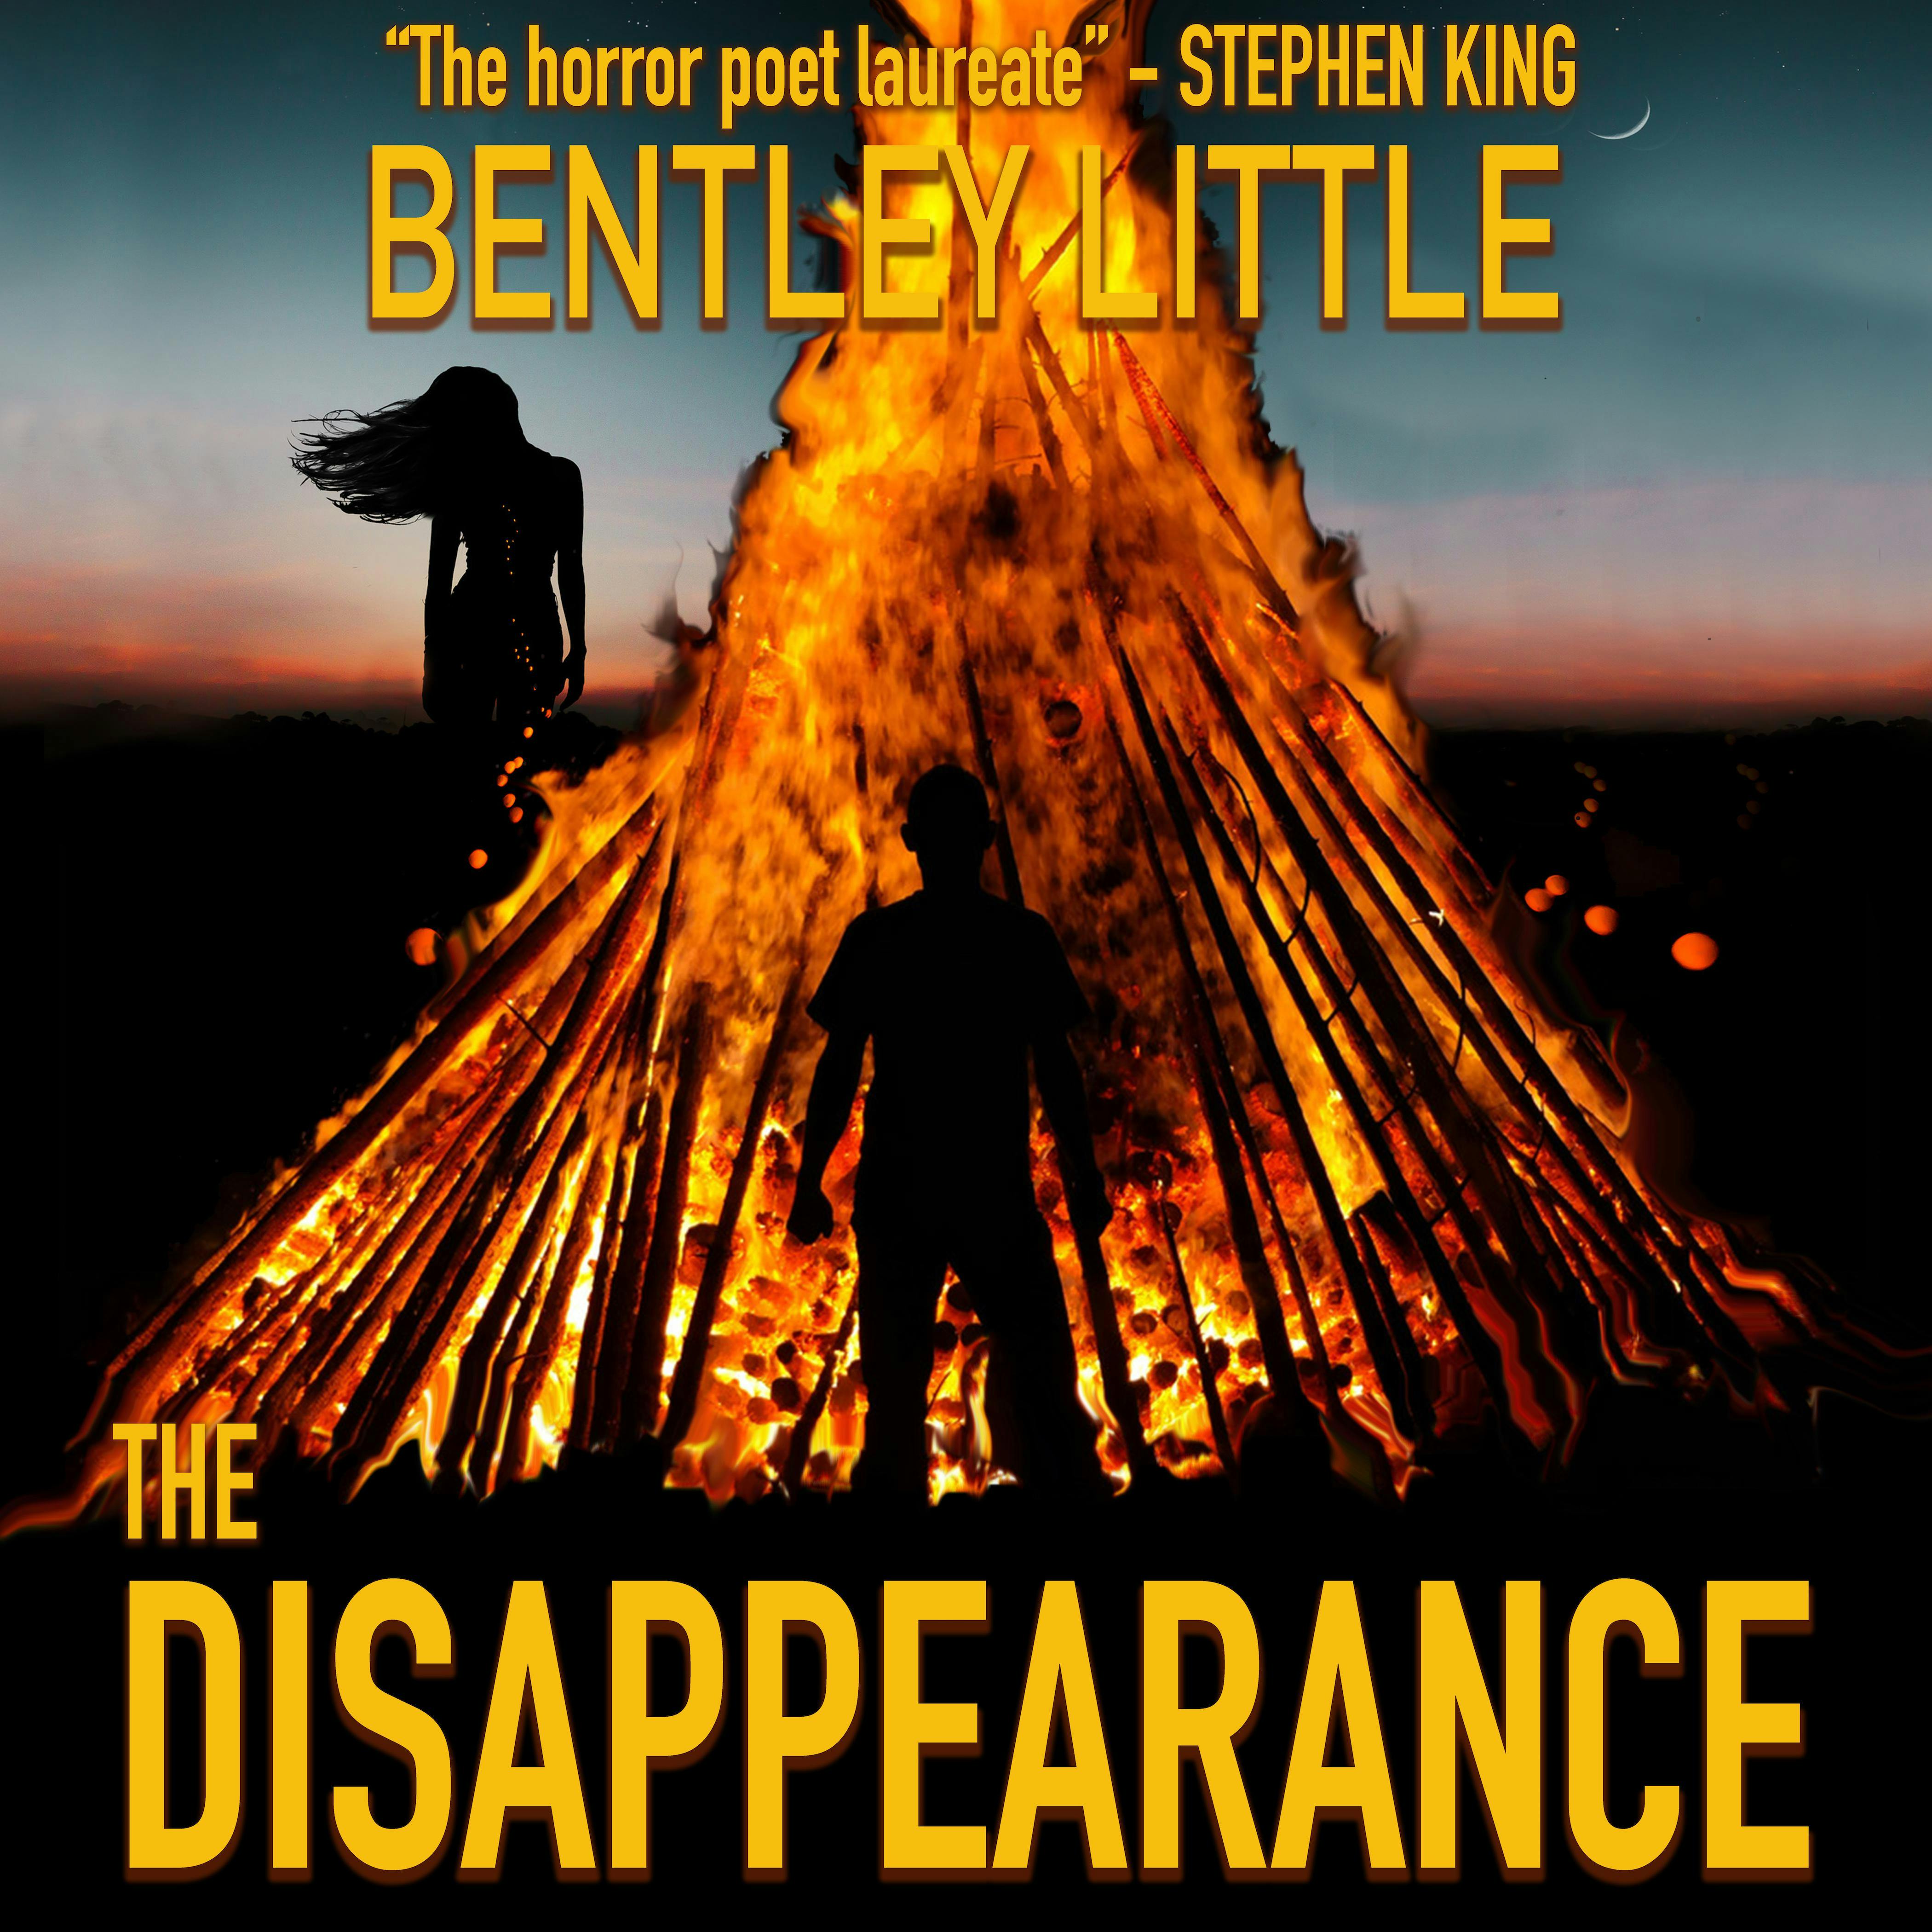 The Disappearance - Bentley Little